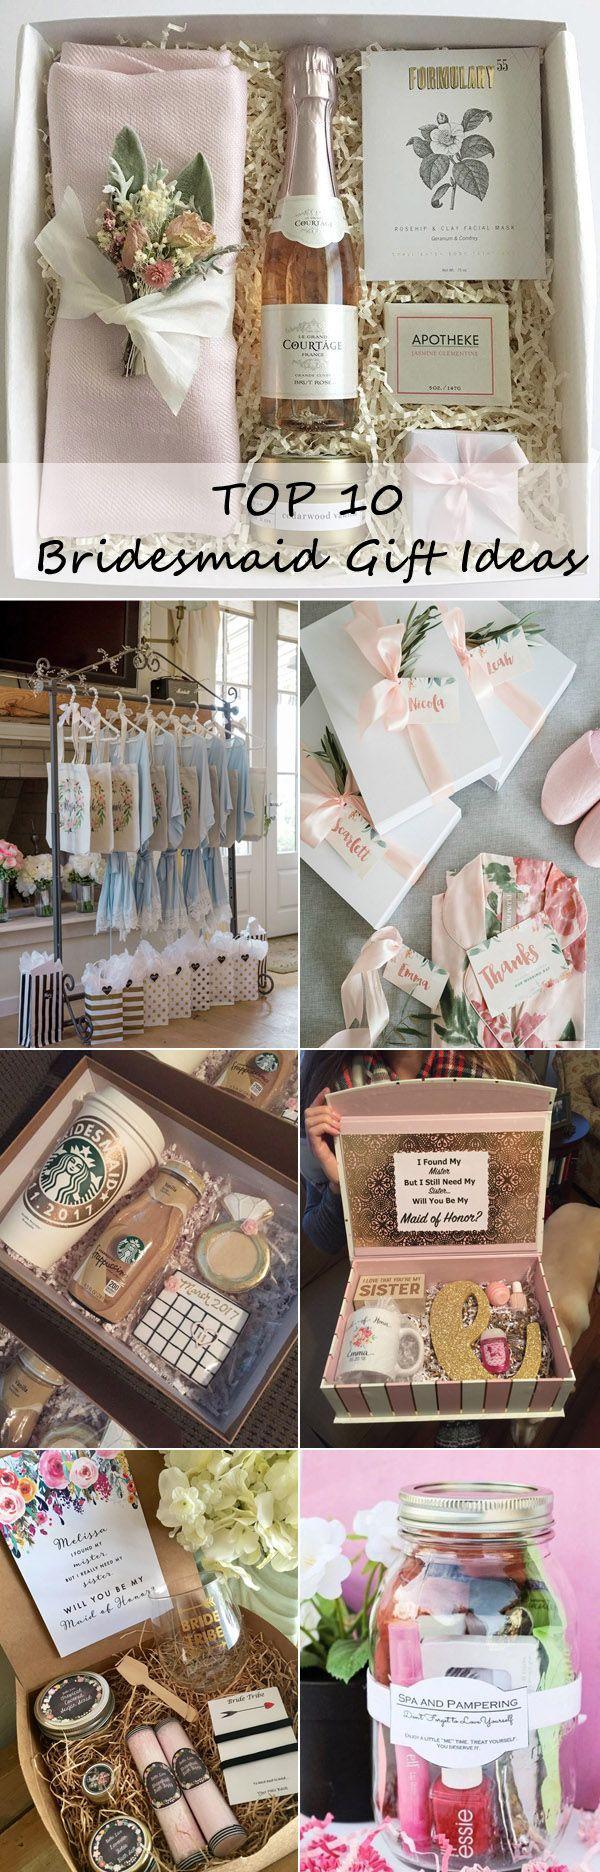 Wedding - Top 10 Bridesmaid Gift Ideas Your Girls Will Love